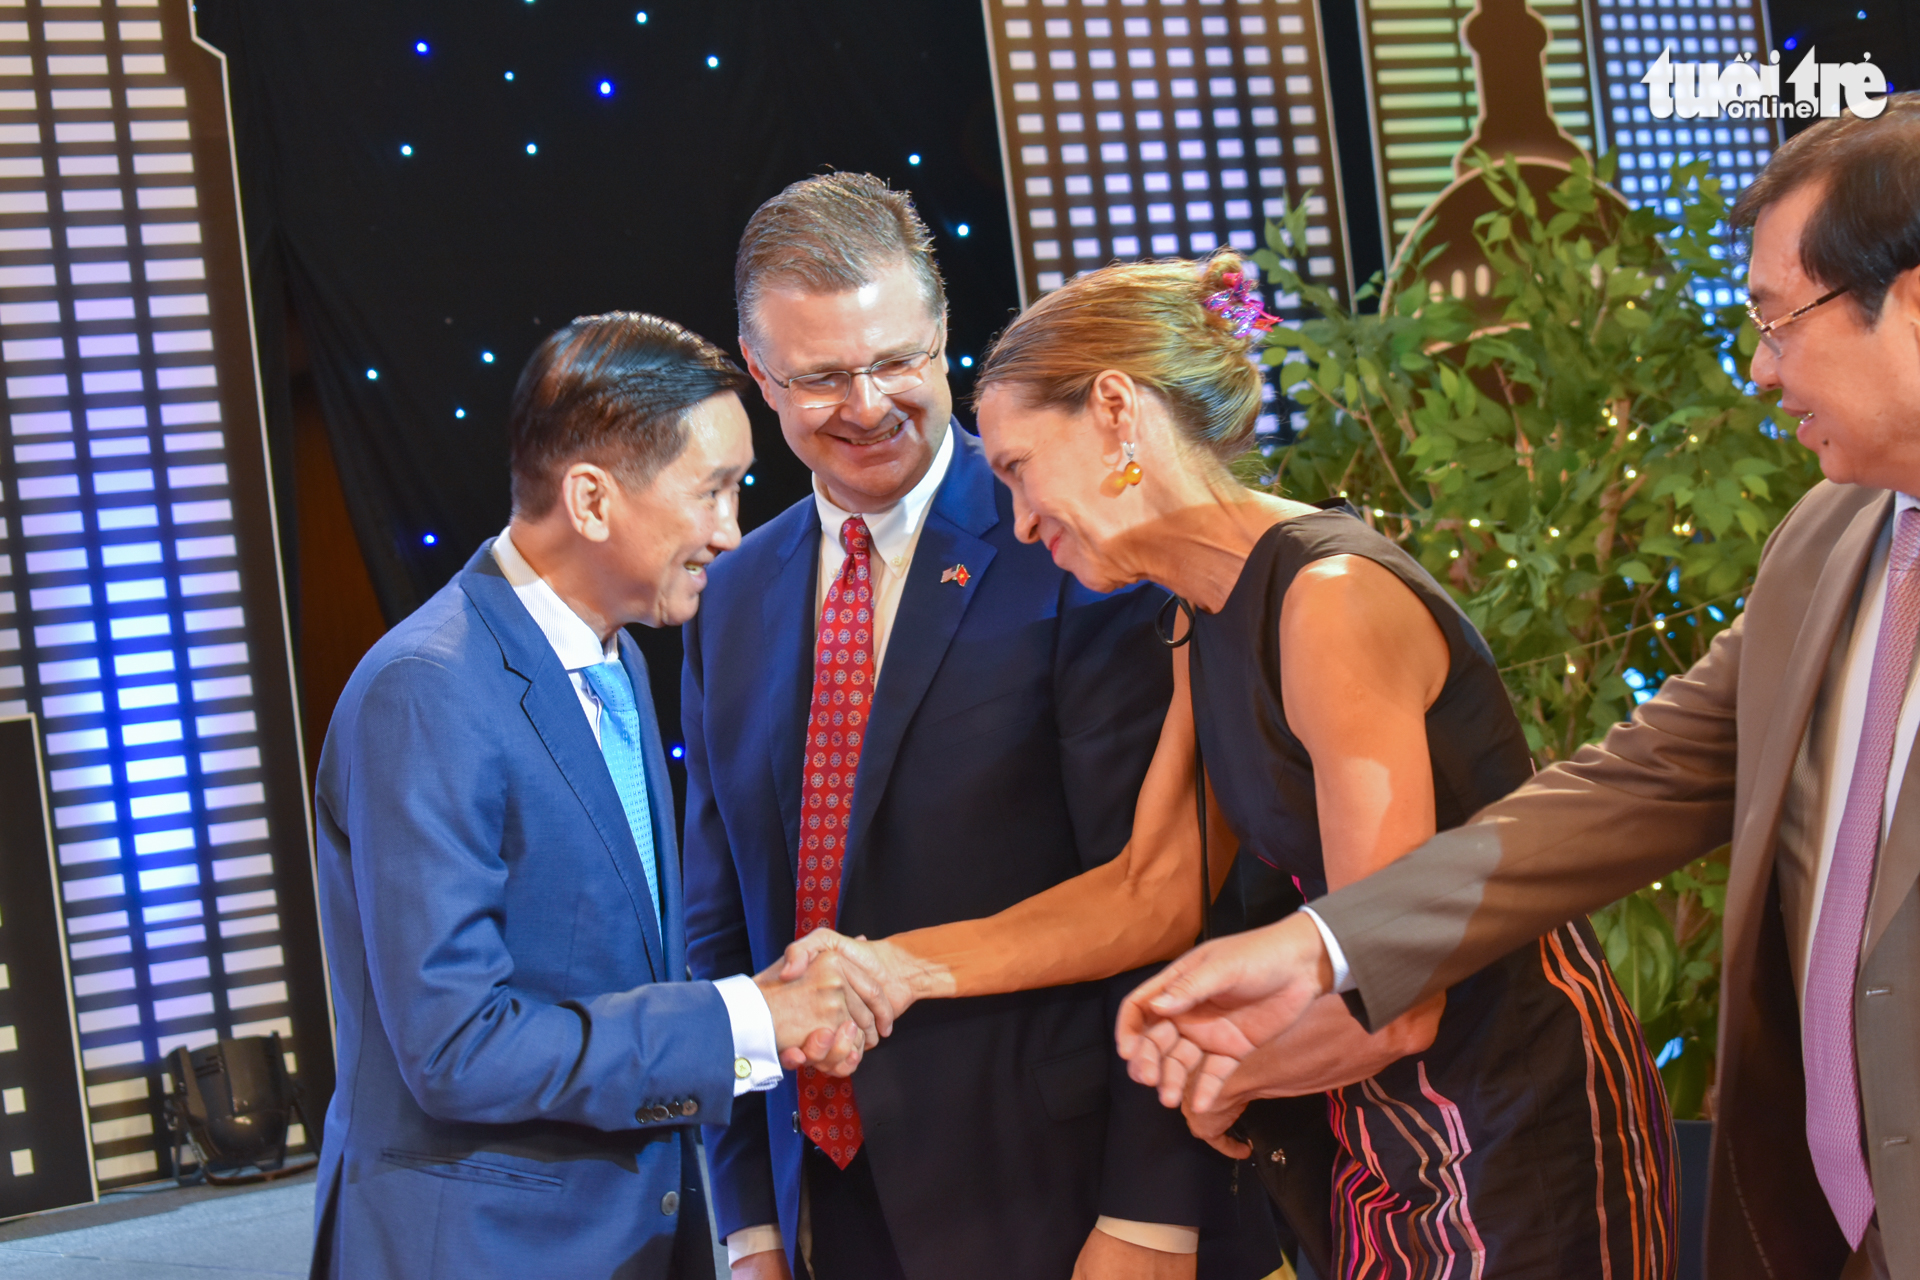 Ho Chi Minh City deputy chairman Tran Vinh Tuyen (L) shakes hands with U.S. Consul General in Ho Chi Minh City Mary Tarnowka as U.S. Ambassador to Vietnam Daniel Kritenbrink (C) reacts at an event celebrating the 243rd U.S. Independence Day in Ho Chi Minh City on June 5, 2019. Photo: Tuan Son / Tuoi Tre News